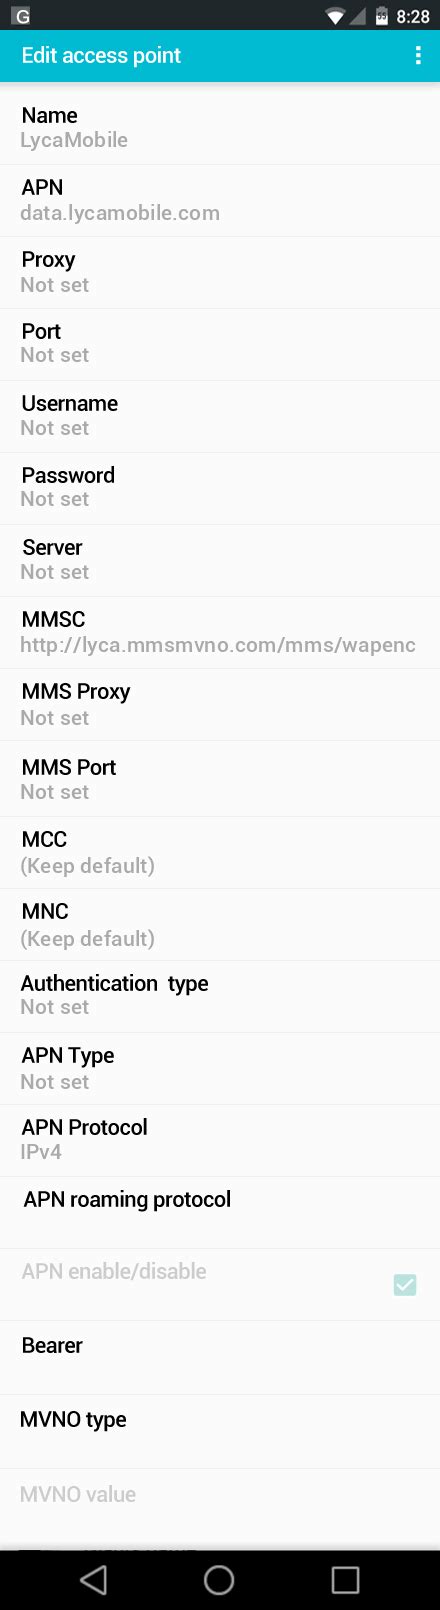 Lycamobile Huawei P8 Lite Internet And Mms Apn Settings For United